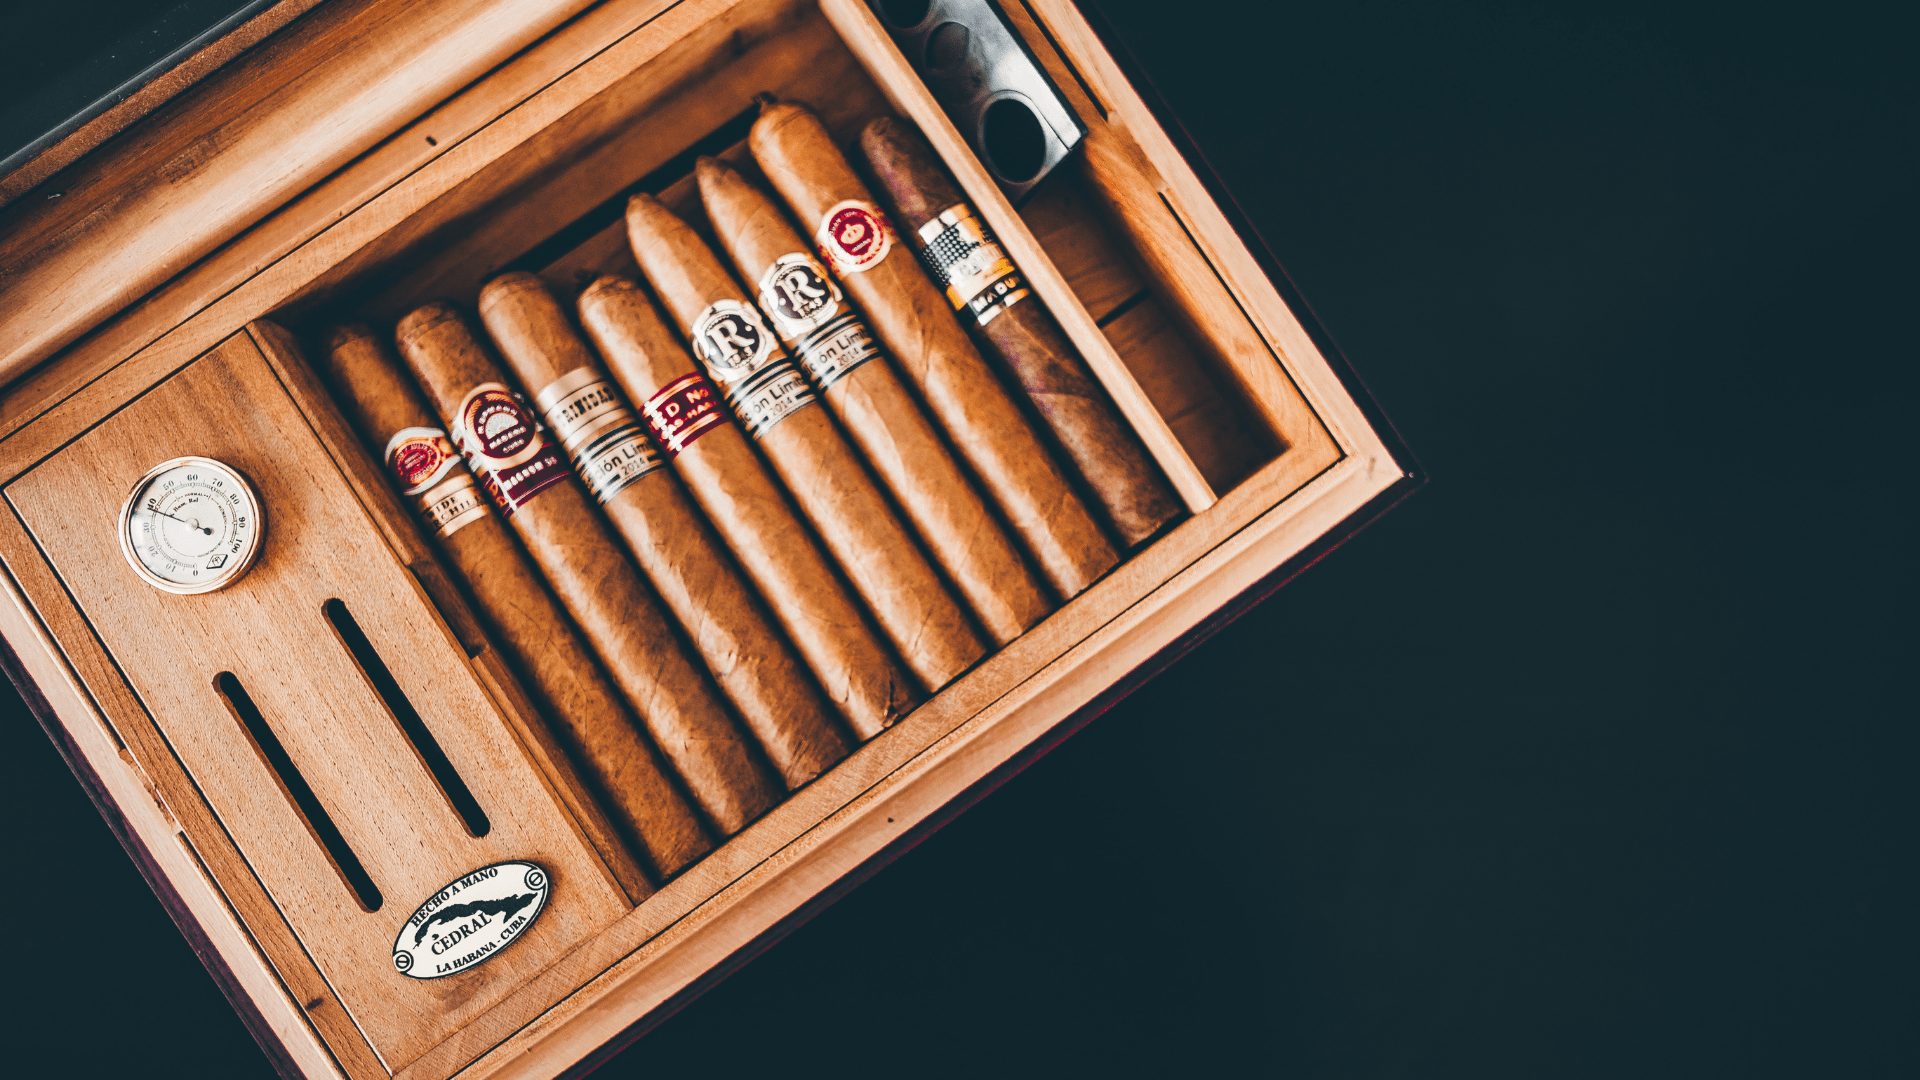 The #1 Cigar Rights Advocates for Consumers - Cigar Rights